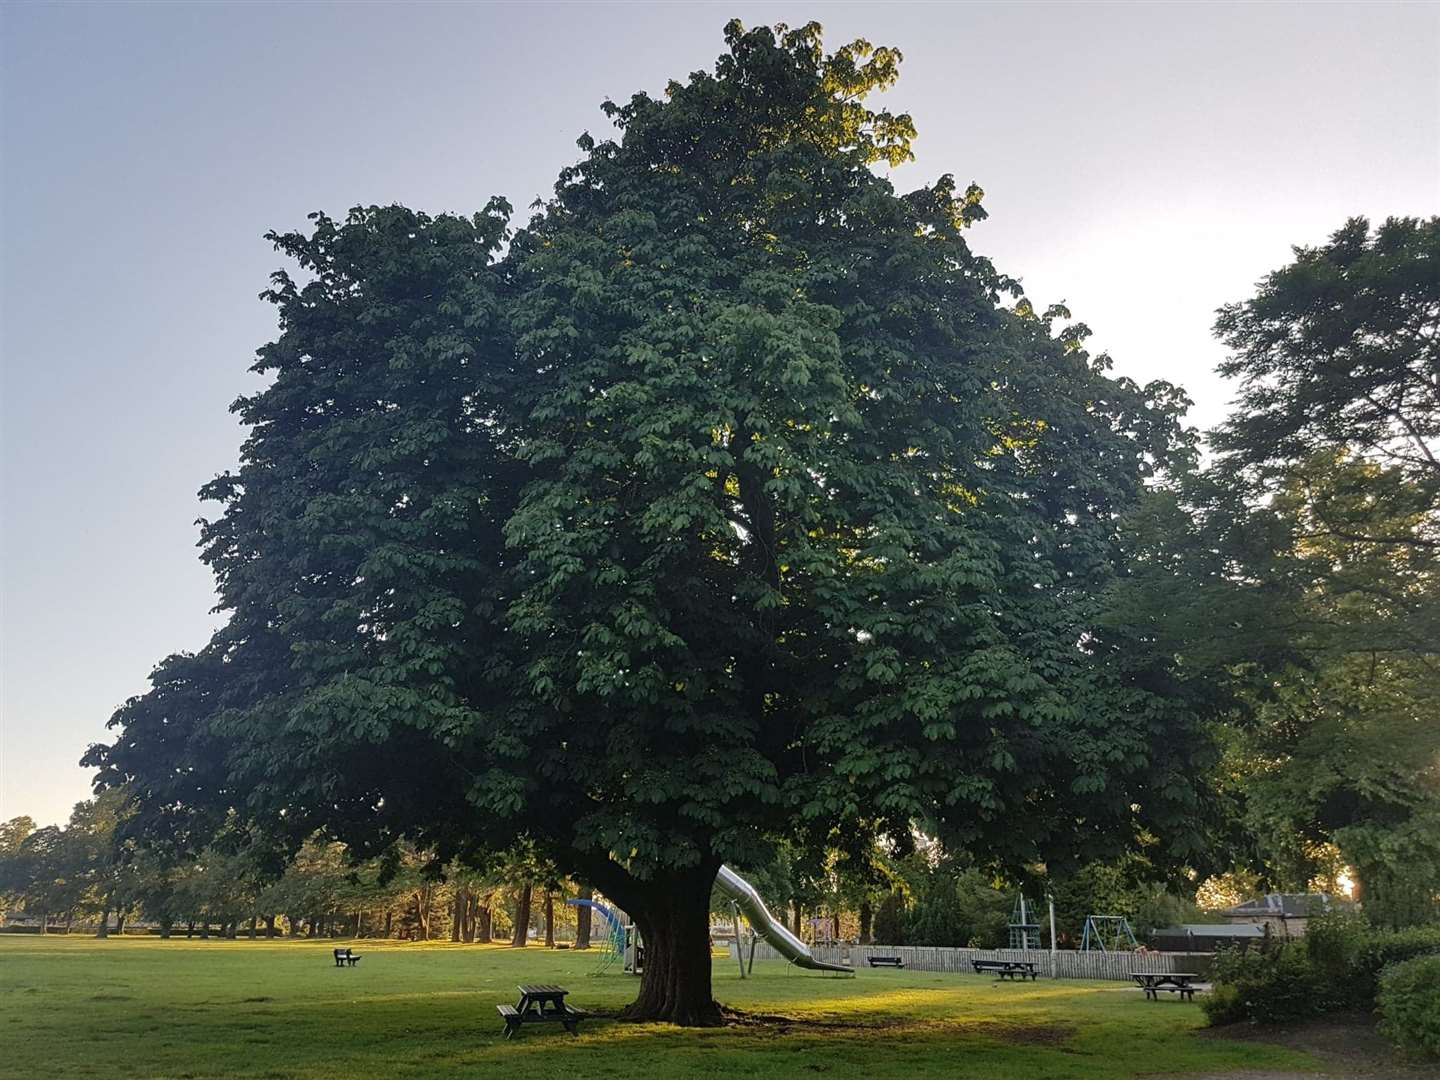 One of Grant Park's many impressive trees, a horse chestnut.